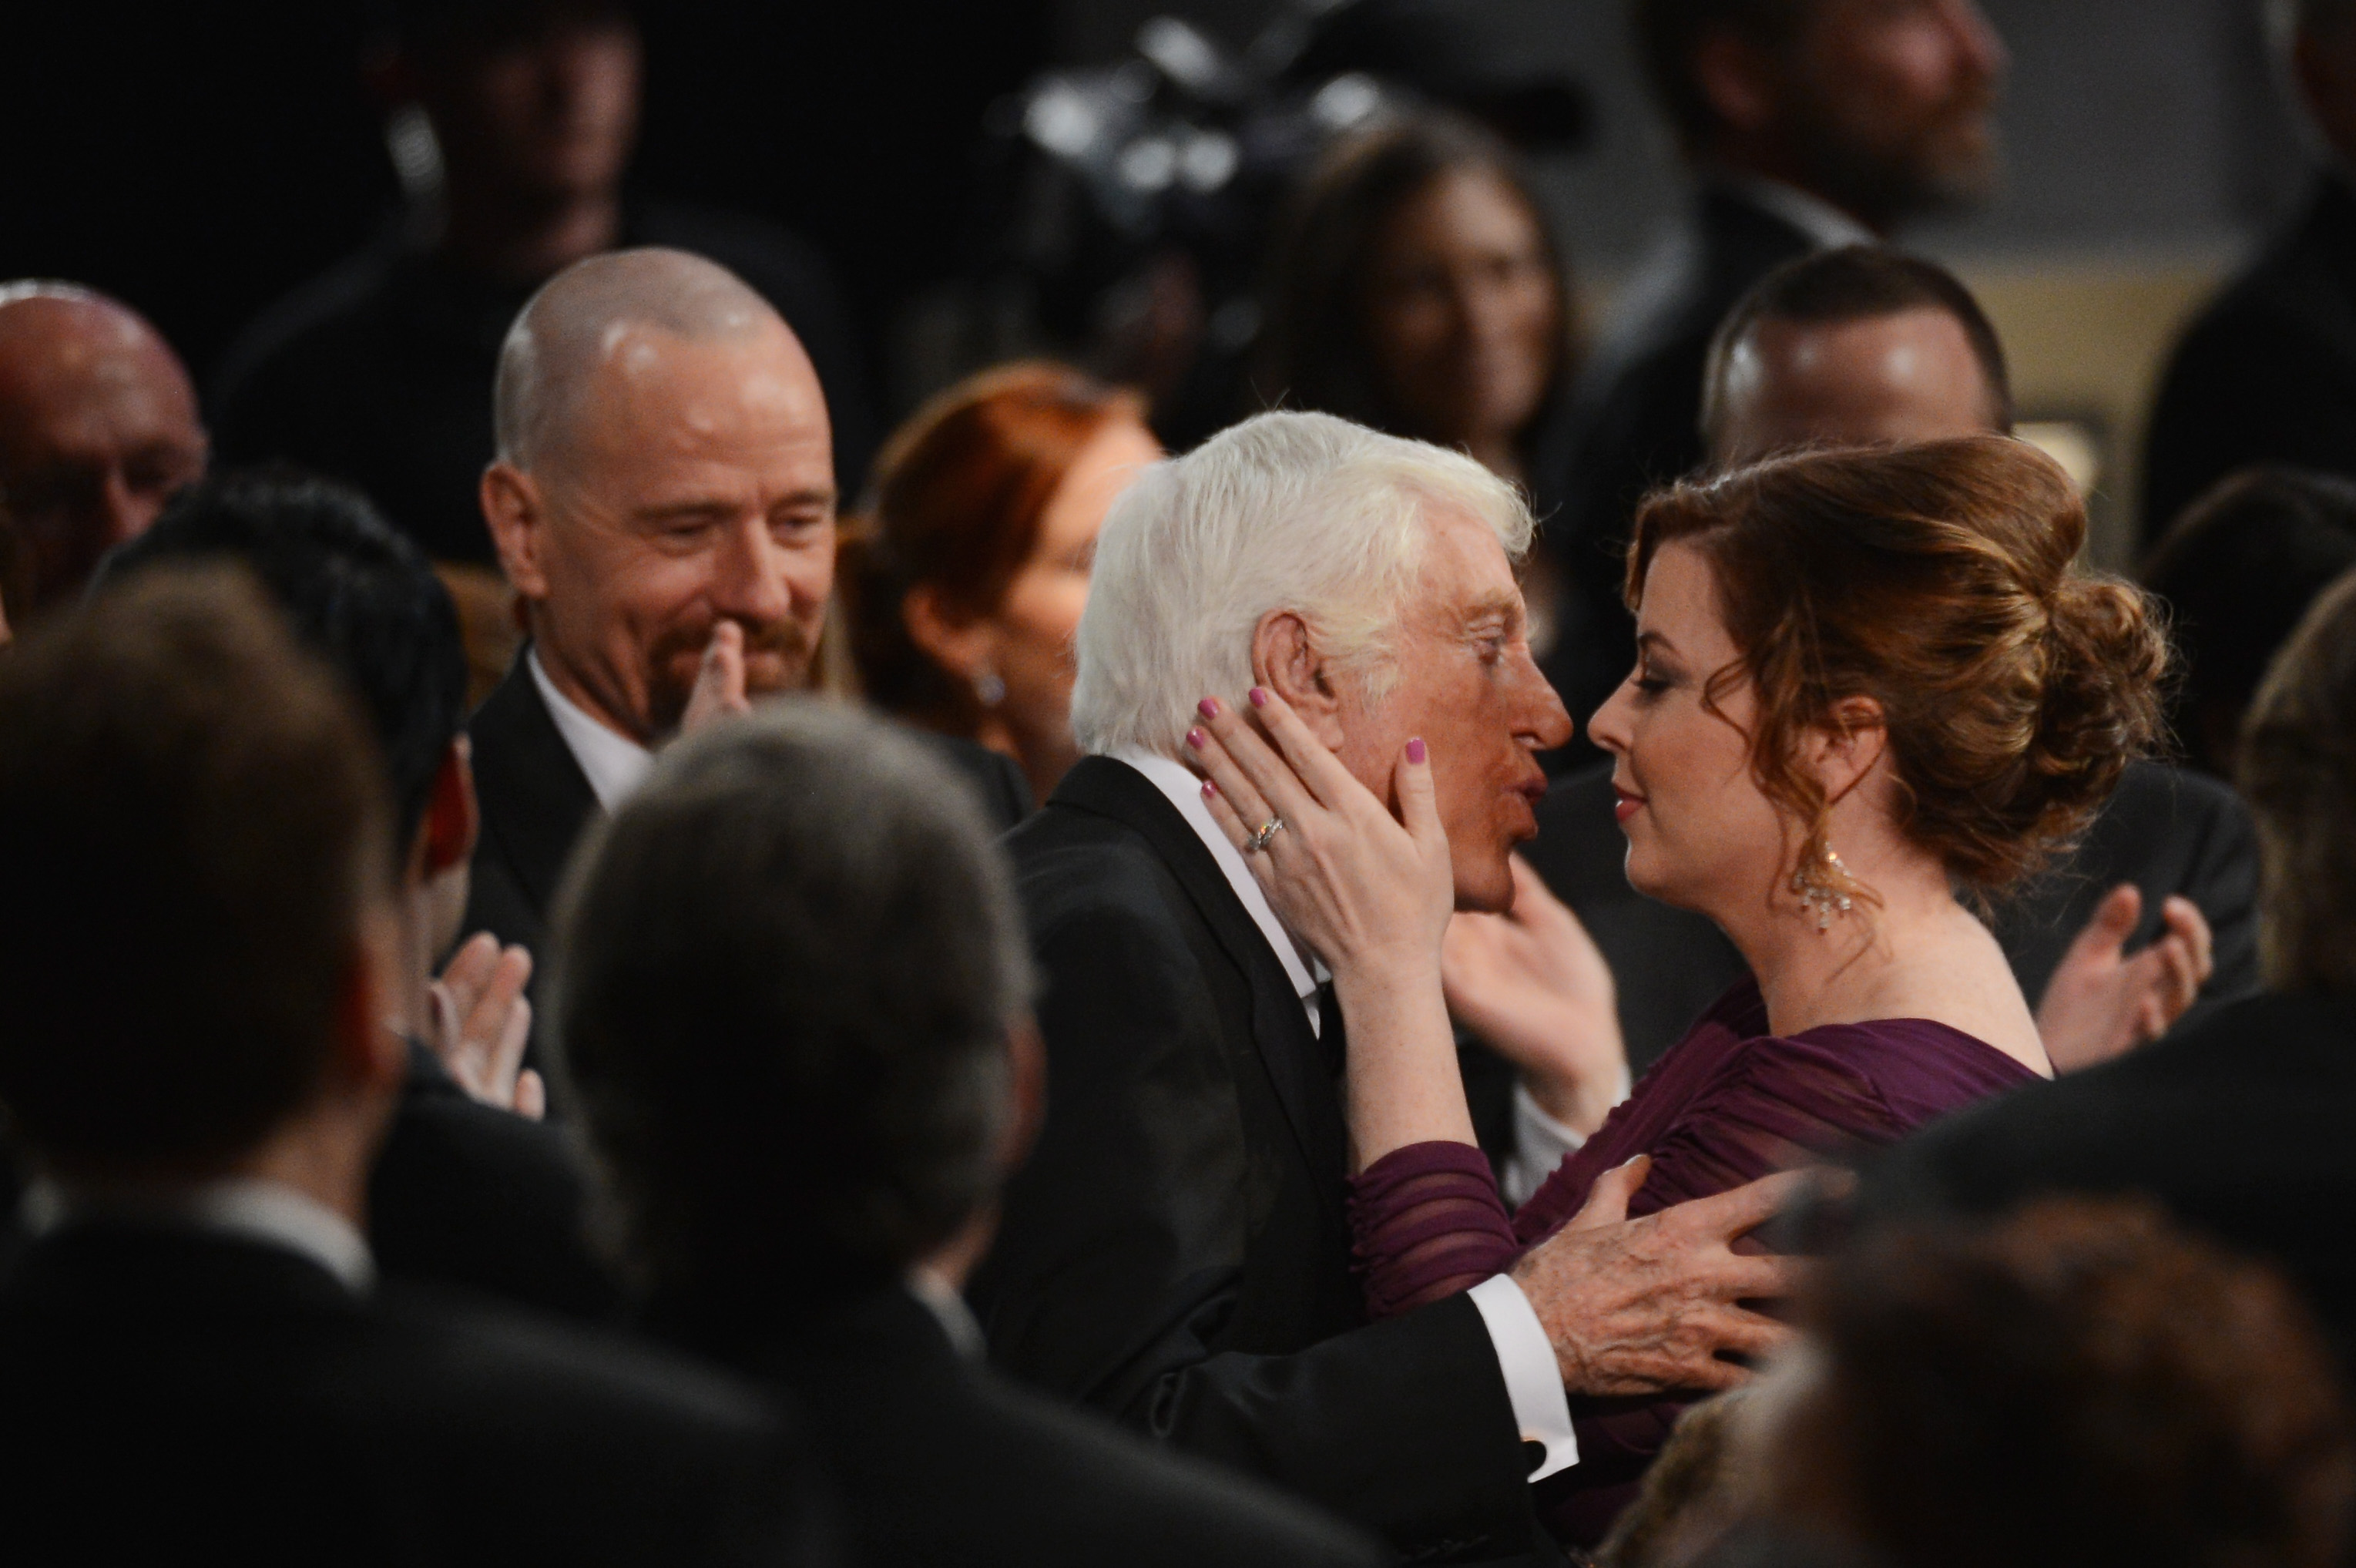 Life Achievement Award winner Dick Van Dyke (C) is congratulated by Arlene Silver (R) during the 19th Annual Screen Actors Guild Awards held at The Shrine Auditorium on January 27, 2013 in Los Angeles, California. | Source: Getty Images